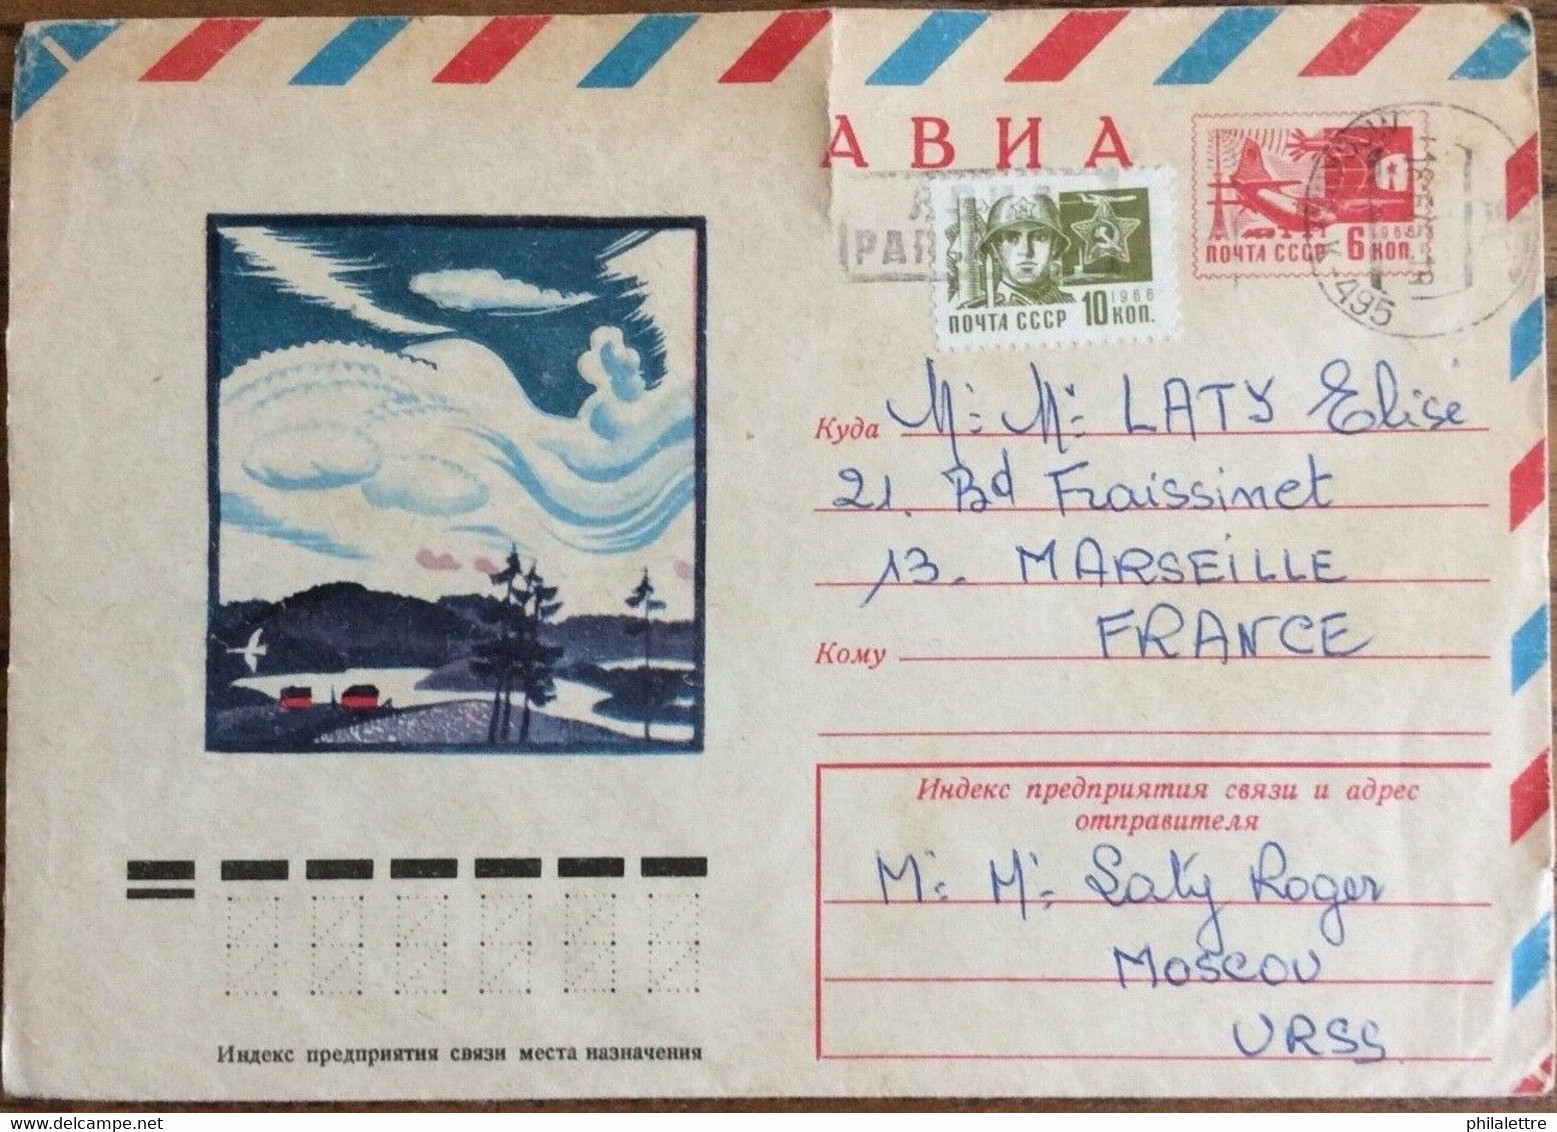 URSS Soviet Union - Air Postal Cover Moscow-K-495 To France - 1960-69